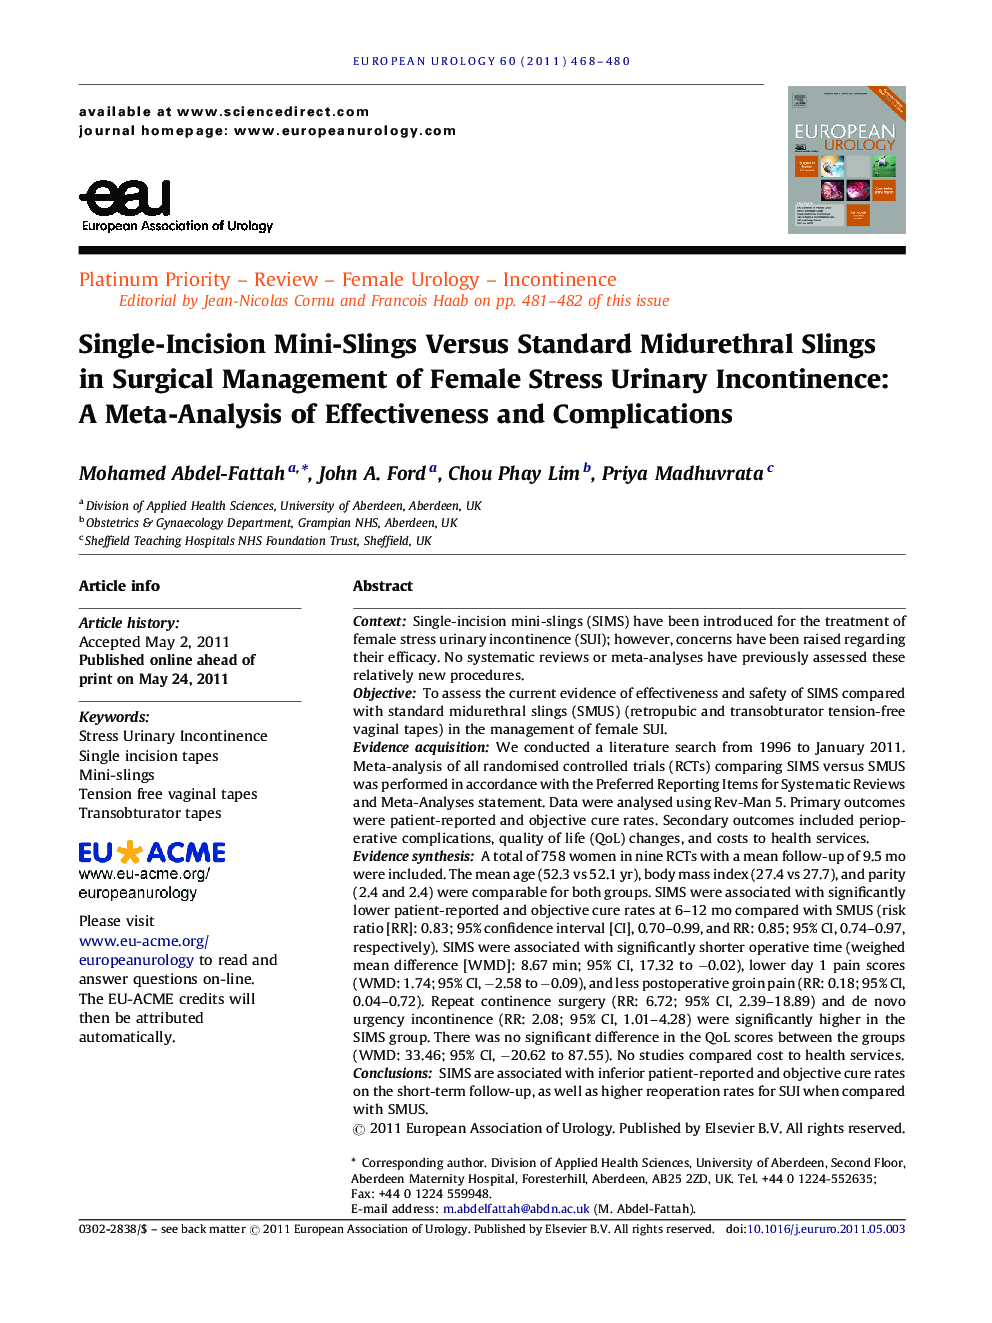 Single-Incision Mini-Slings Versus Standard Midurethral Slings in Surgical Management of Female Stress Urinary Incontinence: A Meta-Analysis of Effectiveness and Complications 